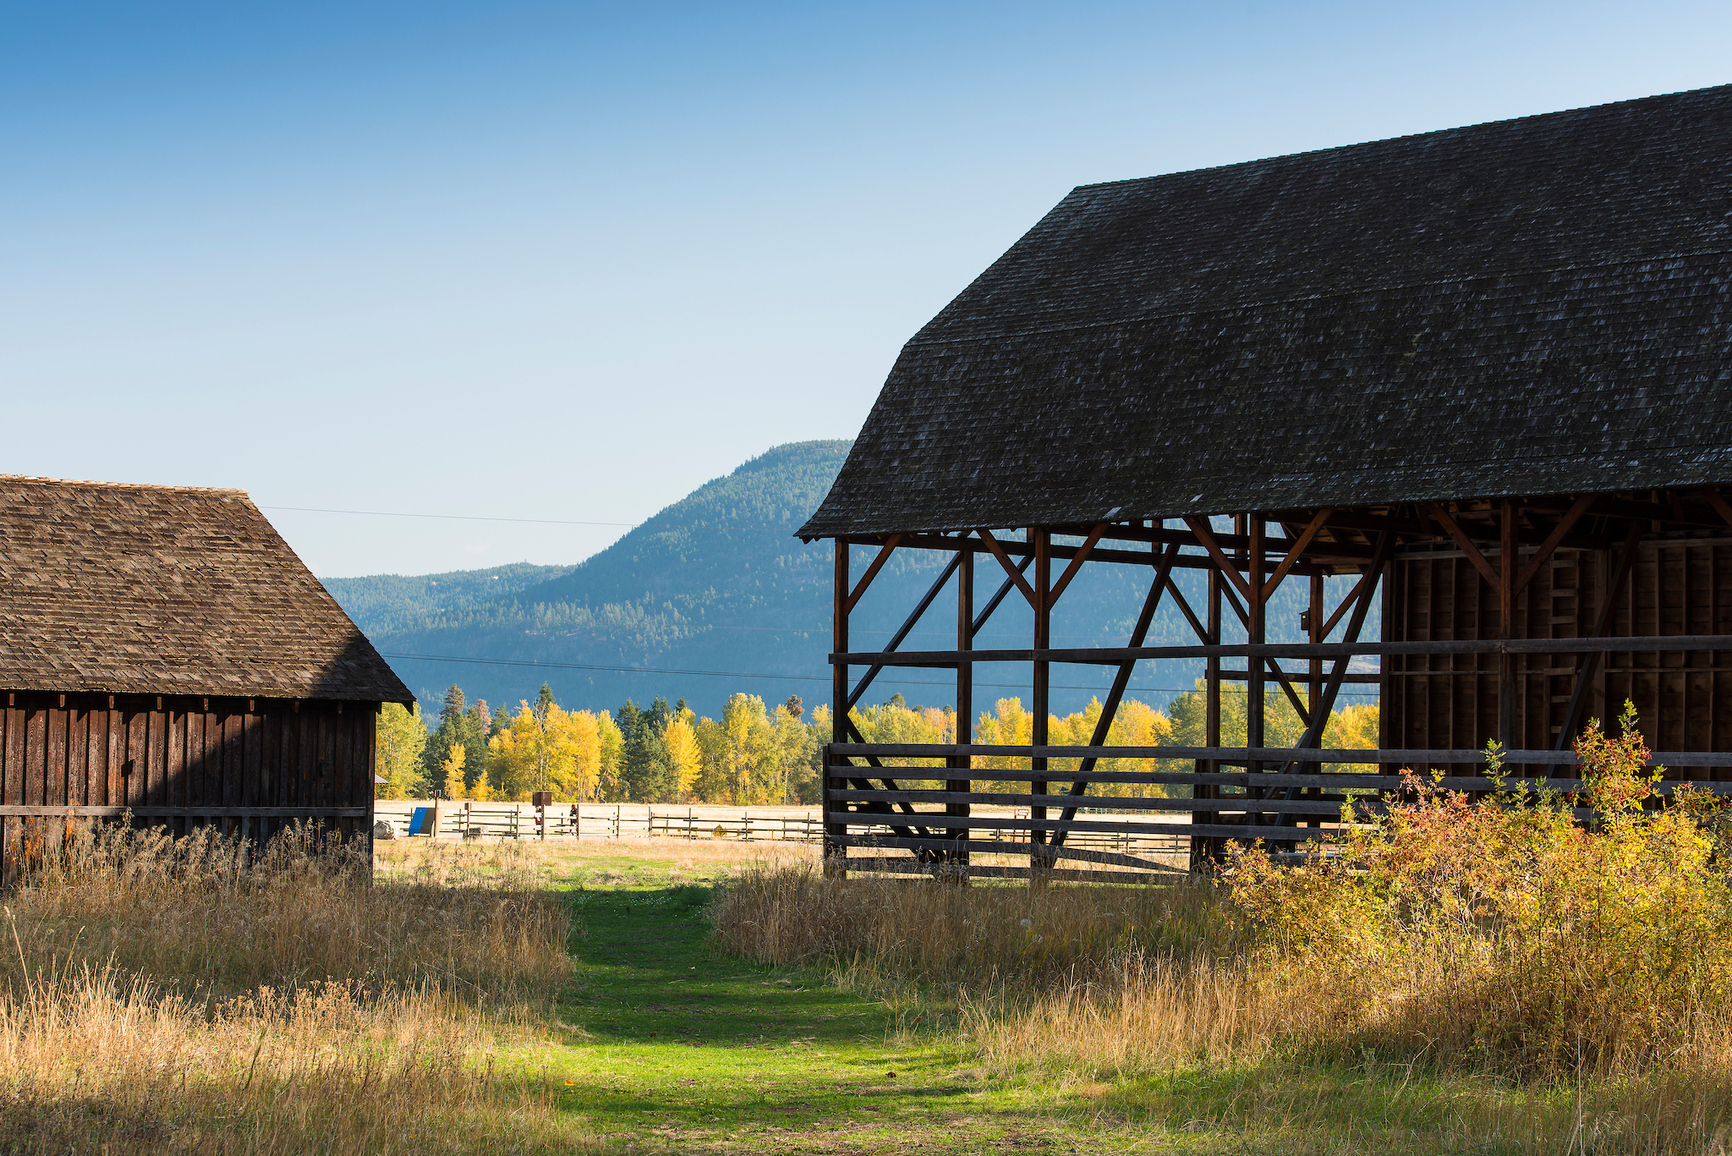 Rustic barn houses opening up to a field and mountains in the distance